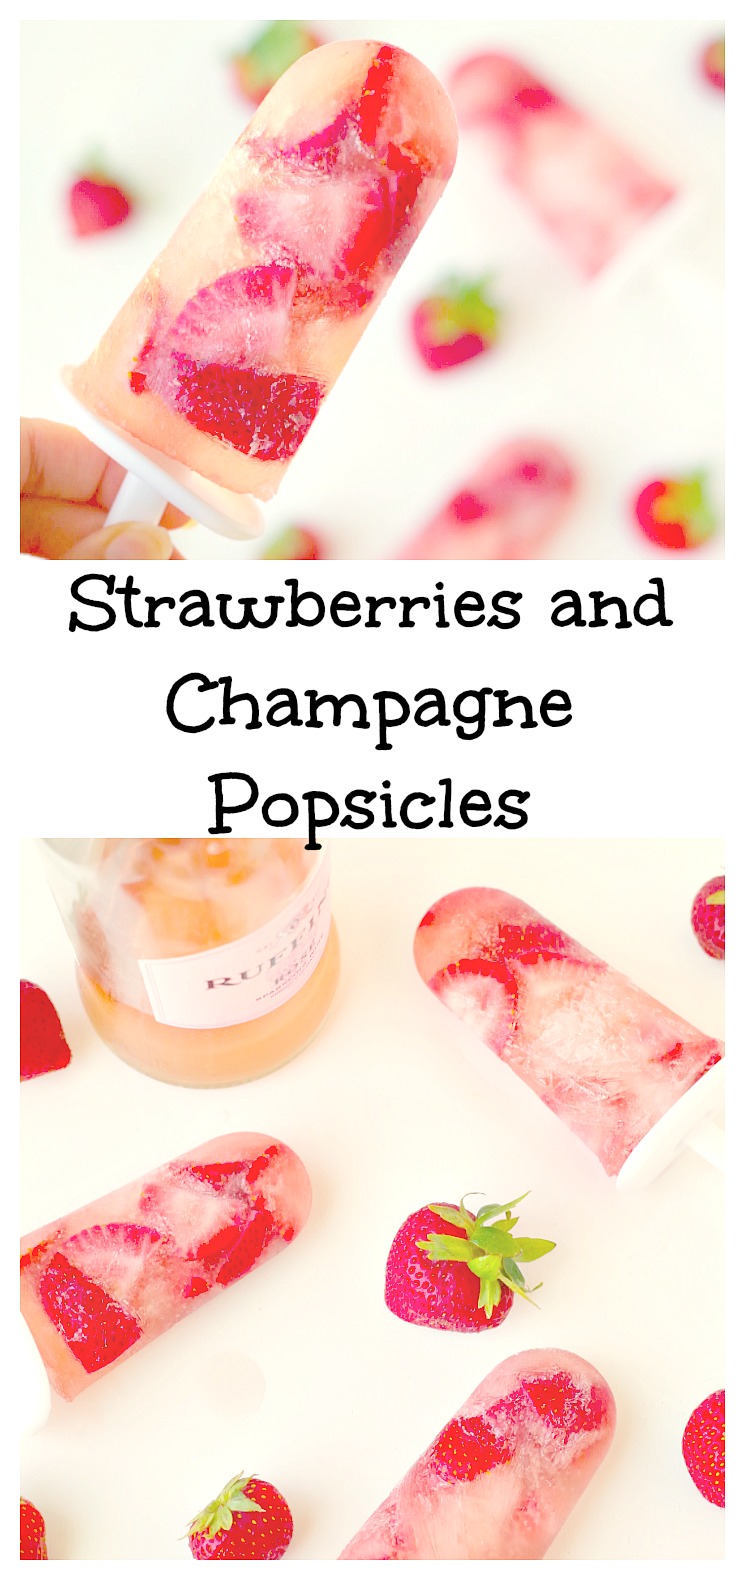 Strawberries and Champagne Popsicles are a fun adult popsicle for summer and parties